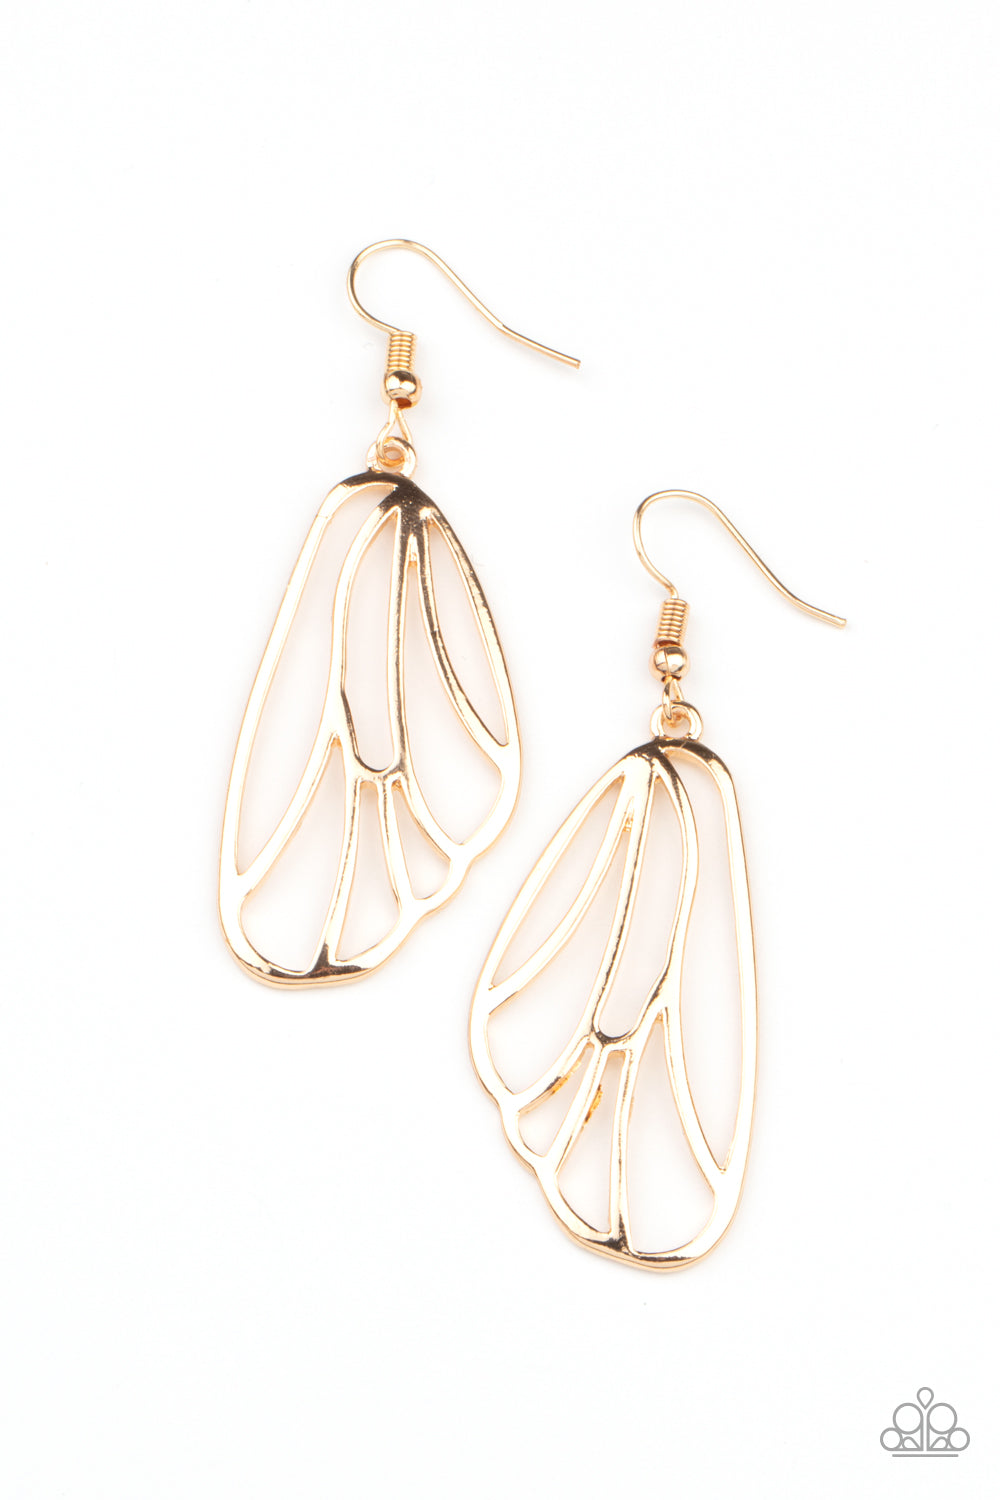 Turn Into A Butterfly Earring (Copper, Gold, Silver)